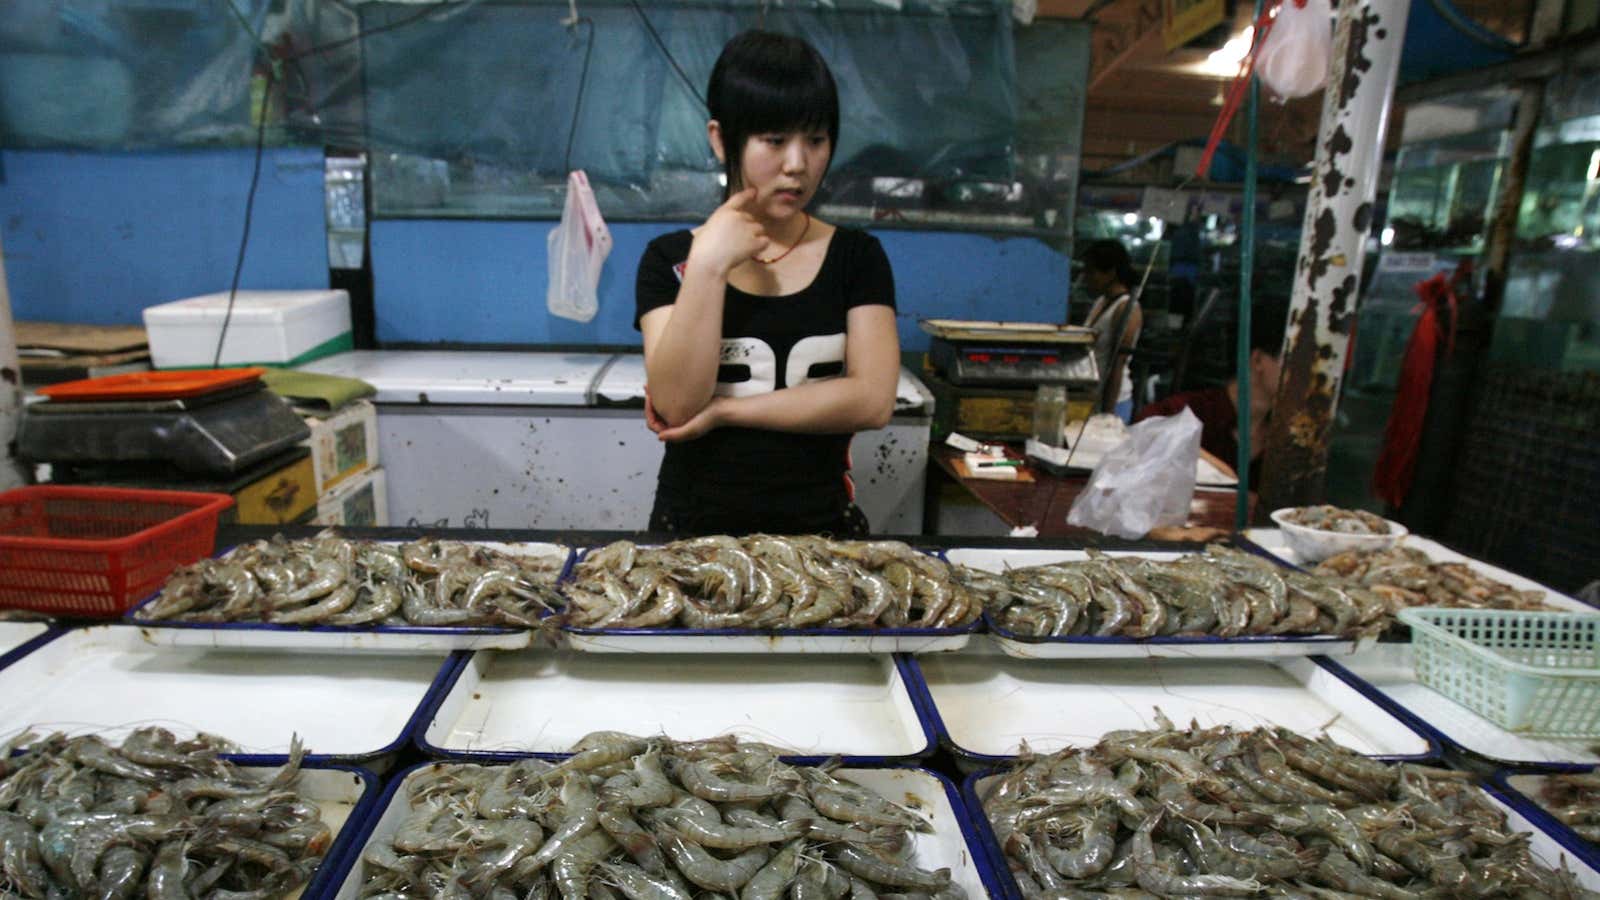 We need to think harder about the real costs of our cheap seafood.